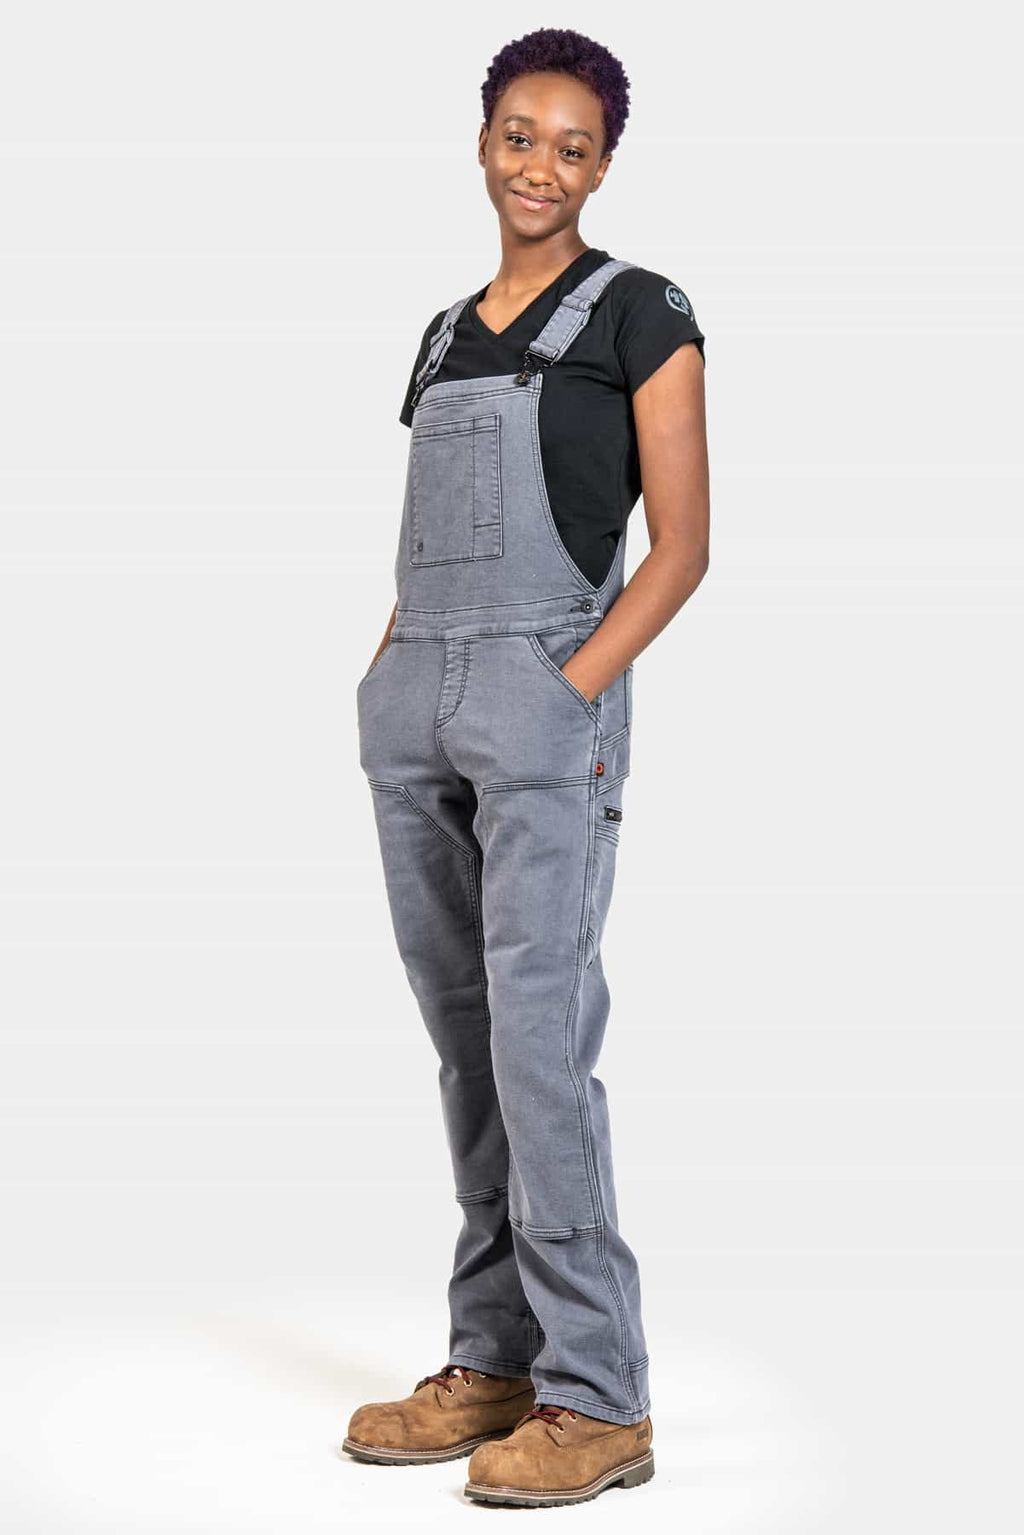 Freshley Overalls in Grey Thermal Denim Work Pants Dovetail Workwear